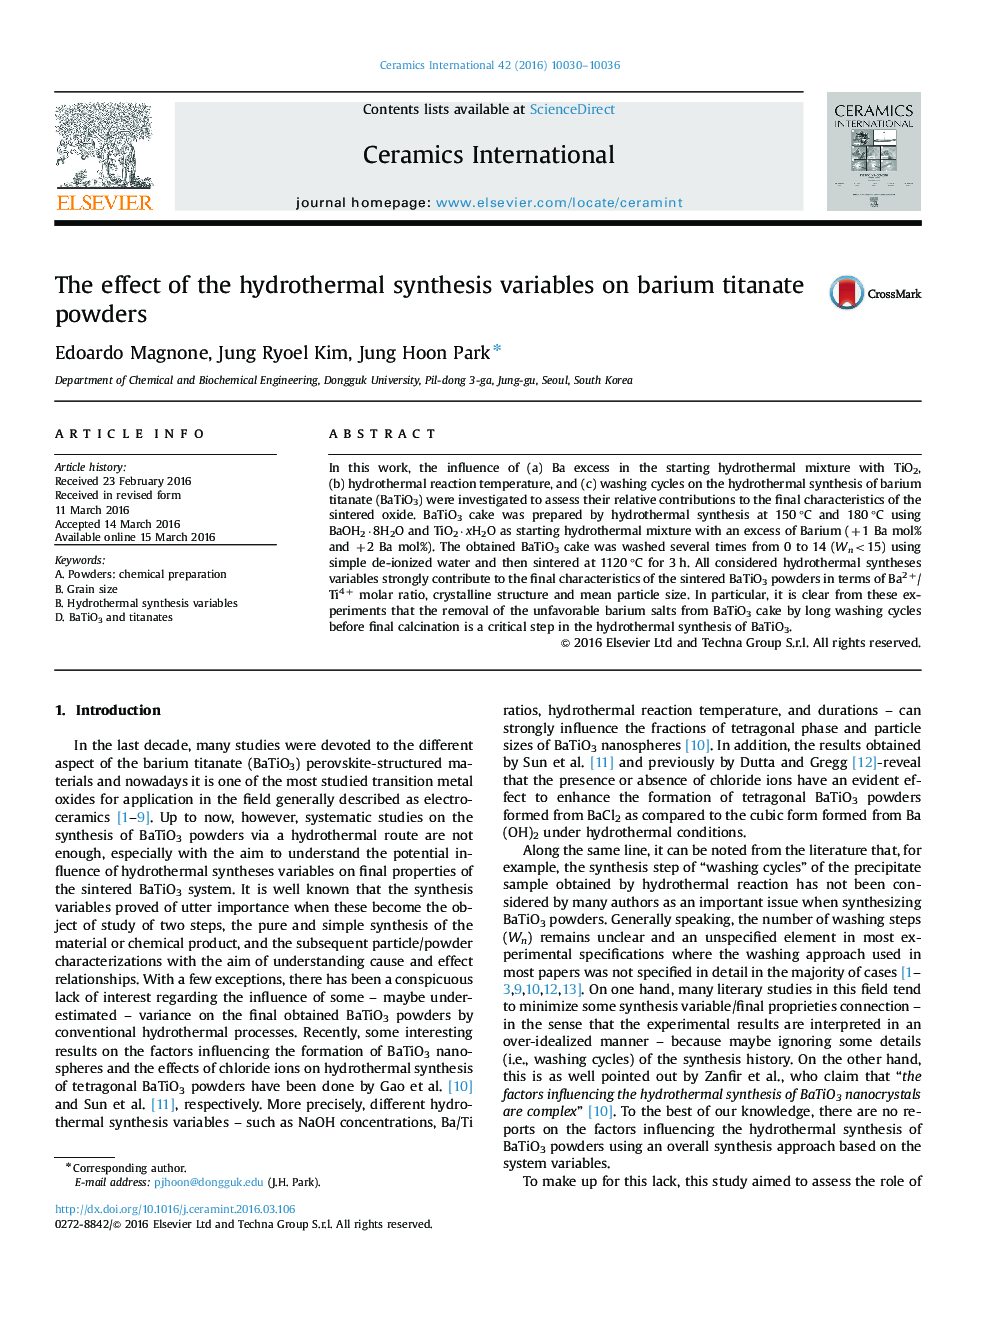 The effect of the hydrothermal synthesis variables on barium titanate powders